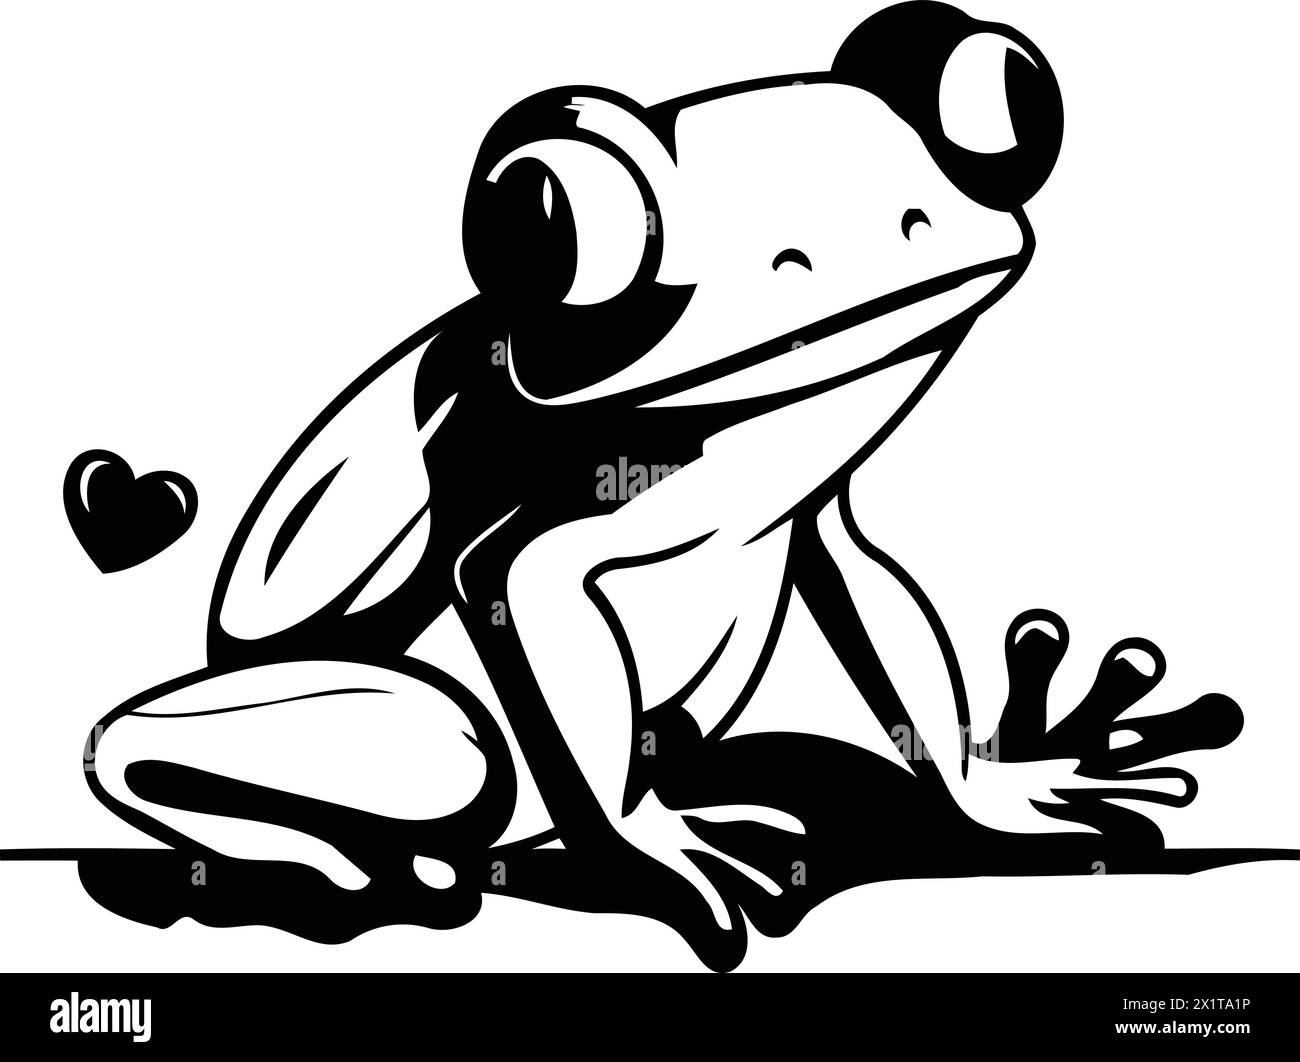 Cute cartoon frog. Vector illustration. Isolated on white background. Stock Vector